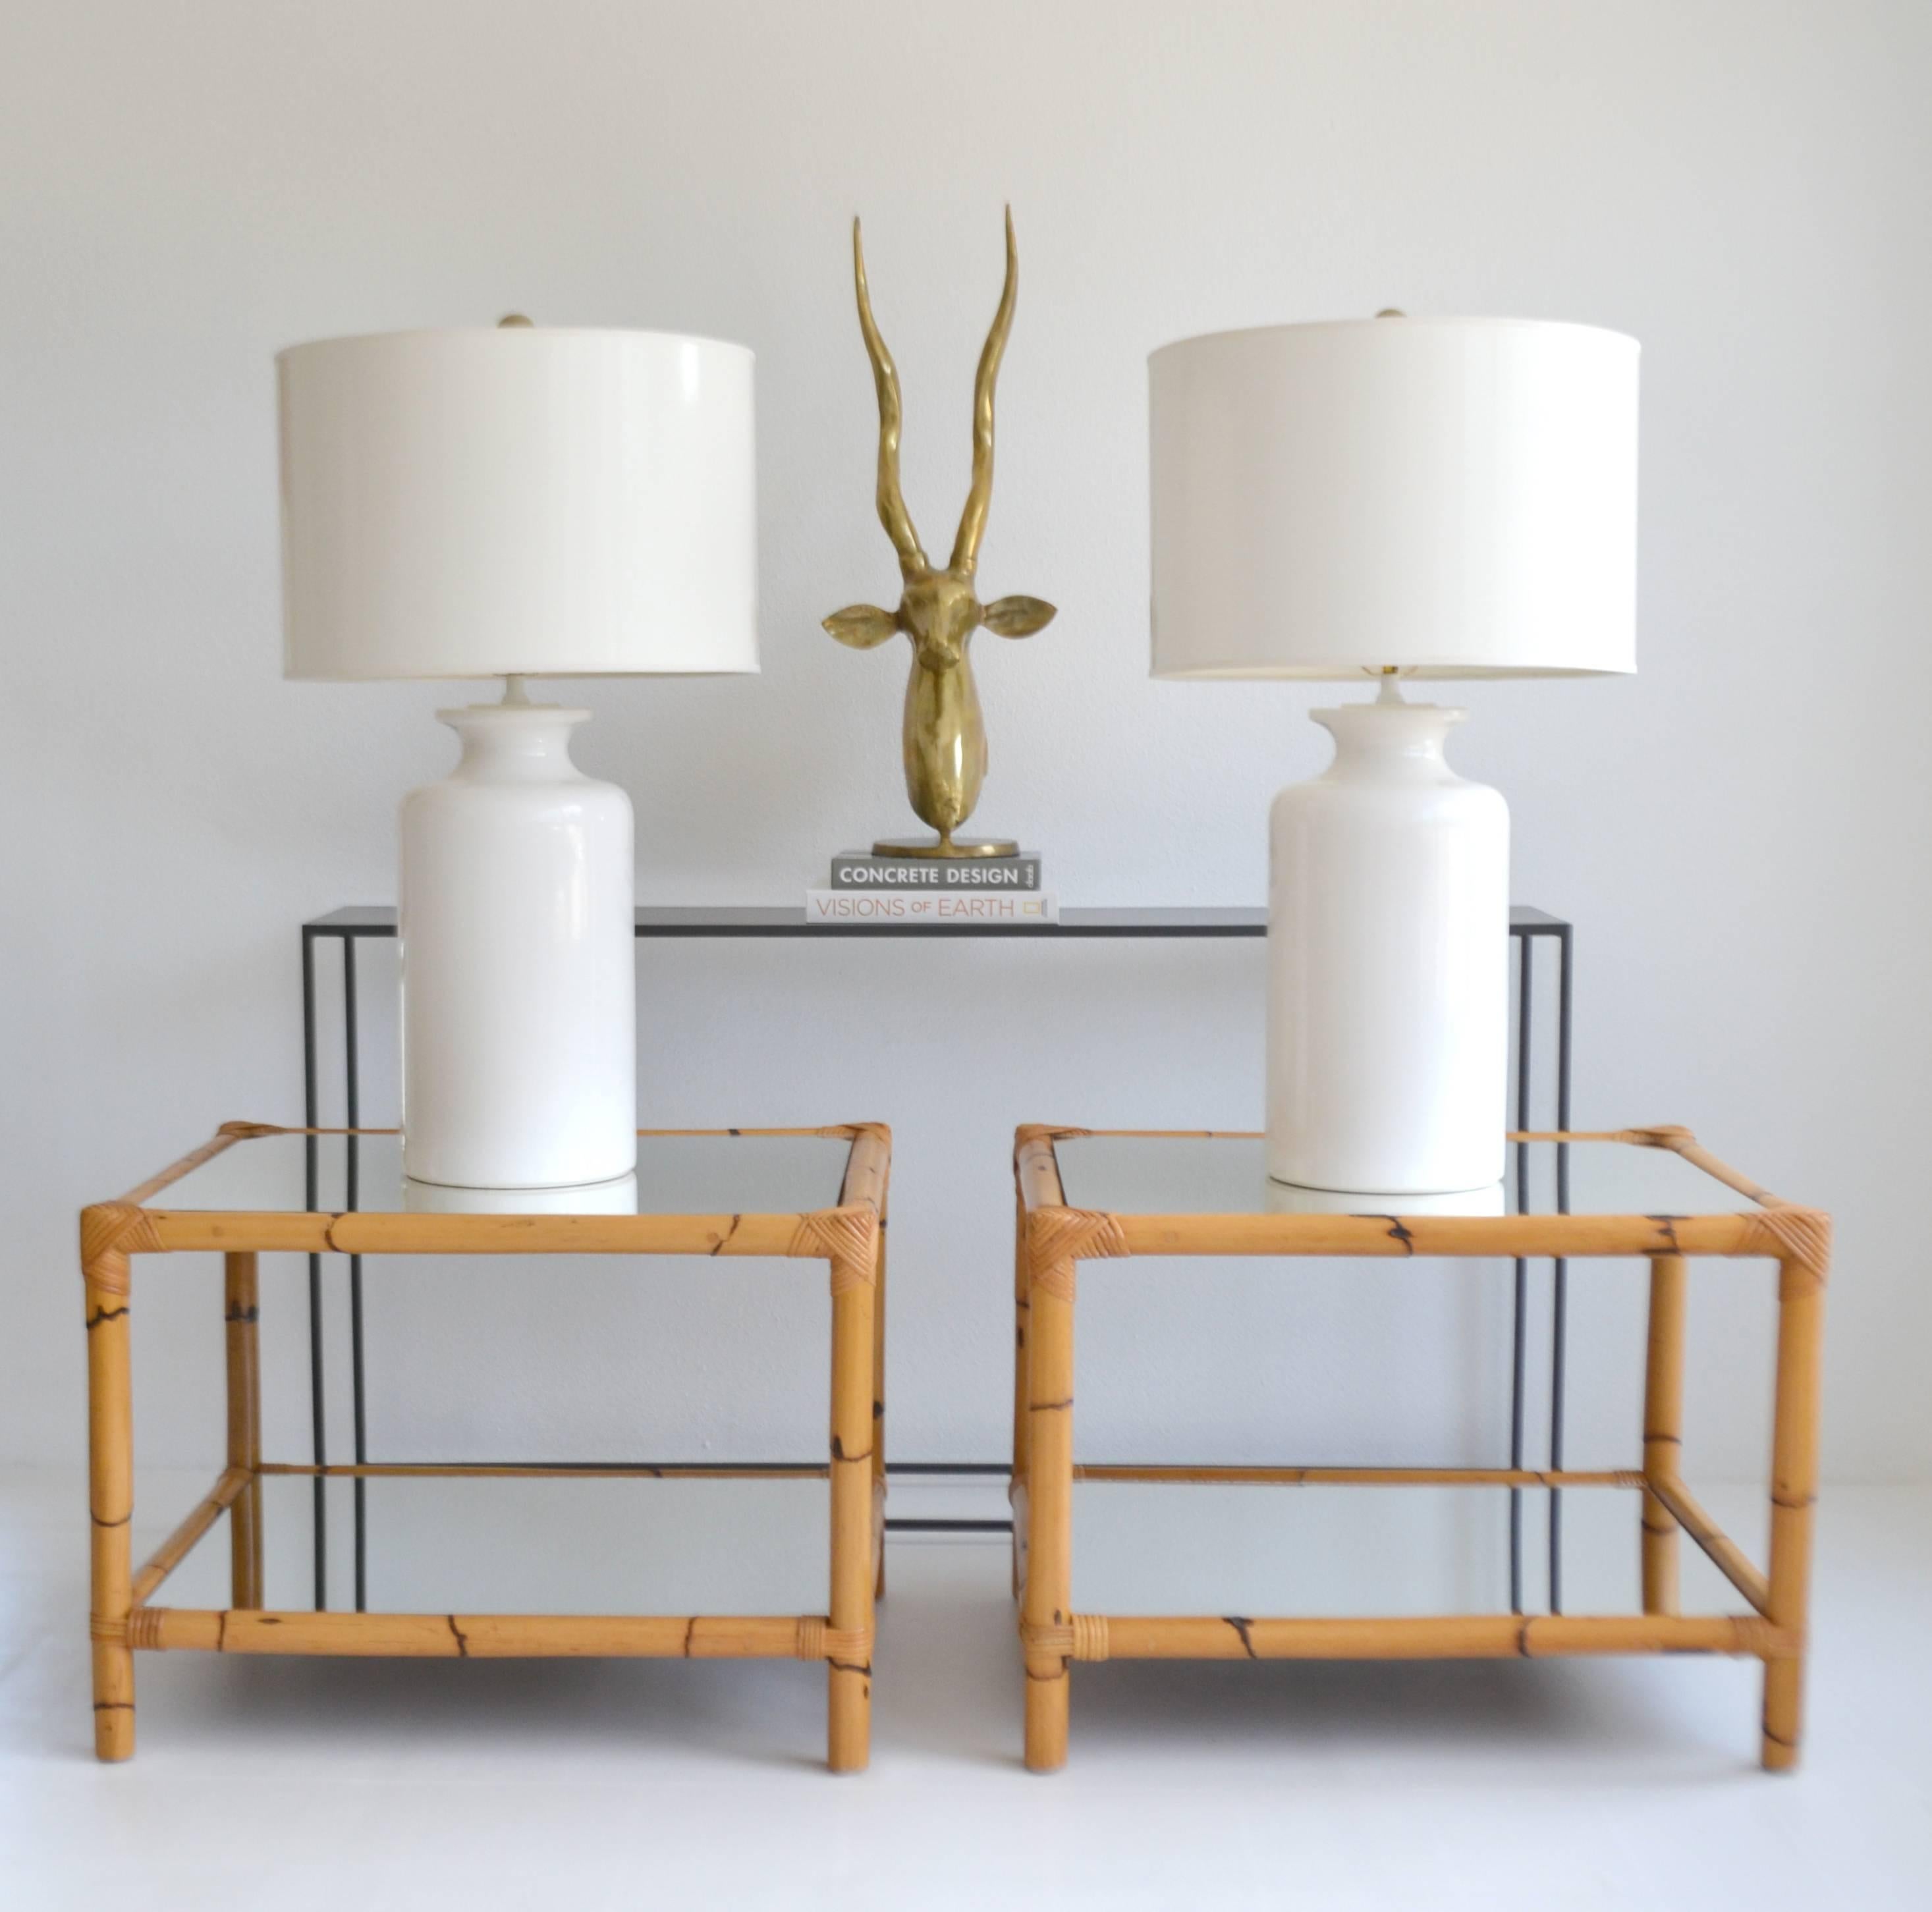 Striking pair of midcentury bamboo two-tier side tables with inset mirrored tops, circa 1960s-1970s.